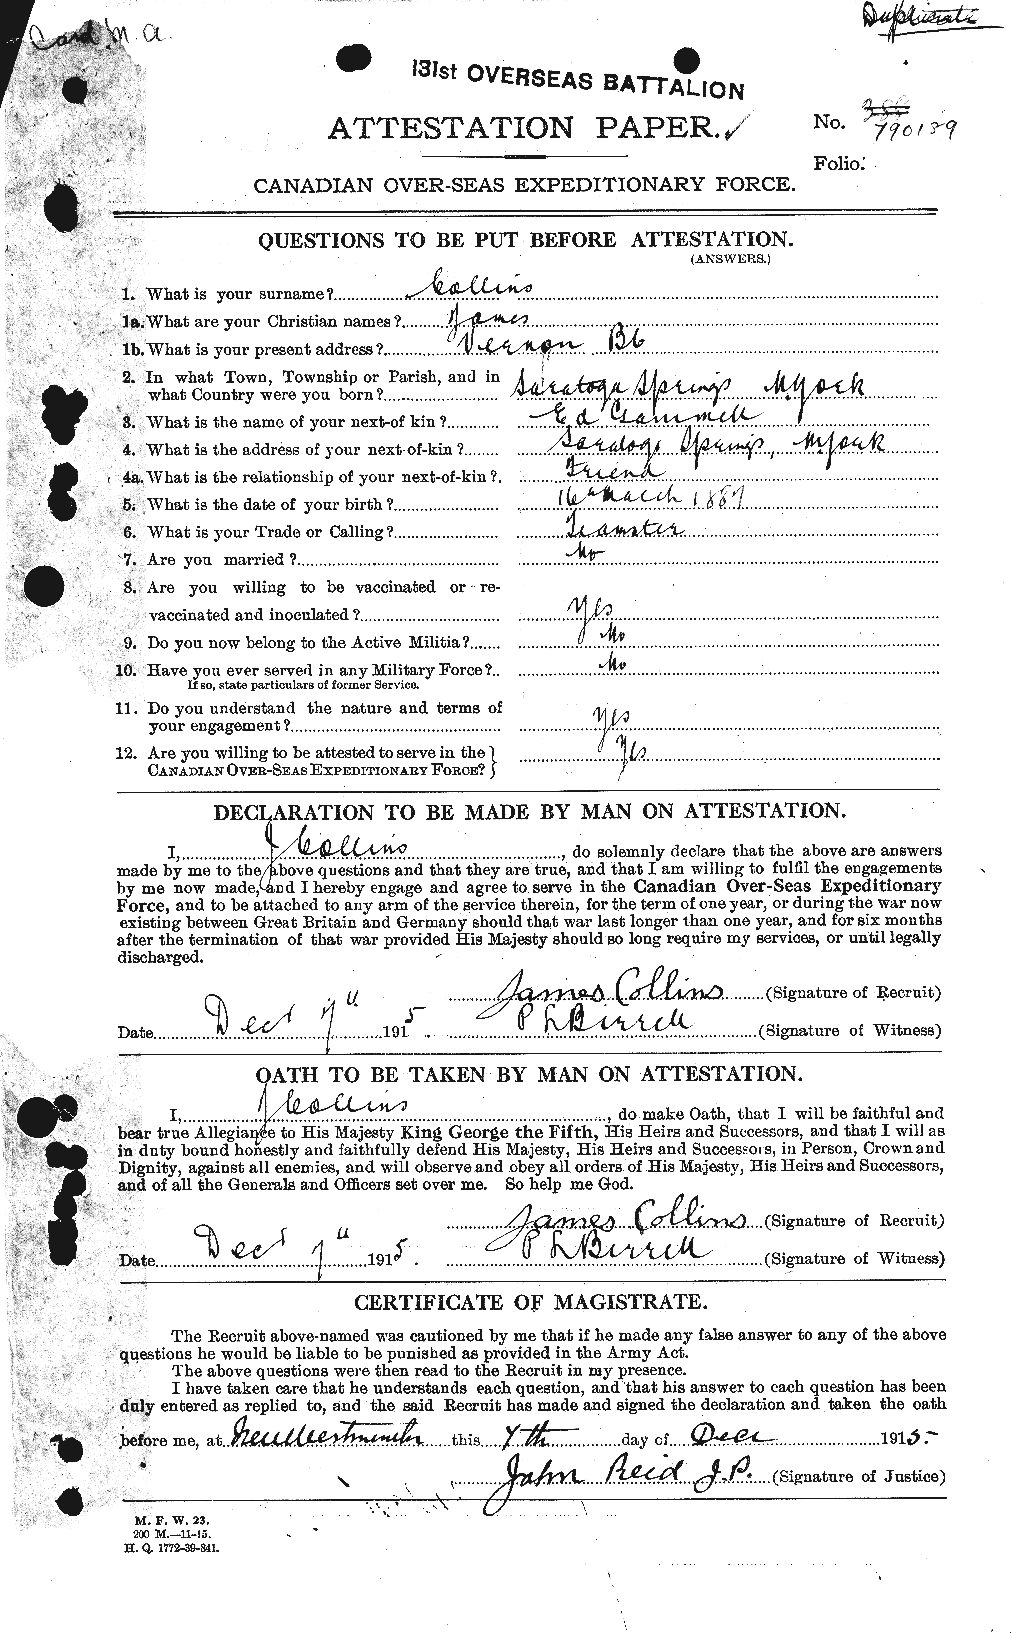 Personnel Records of the First World War - CEF 069978a